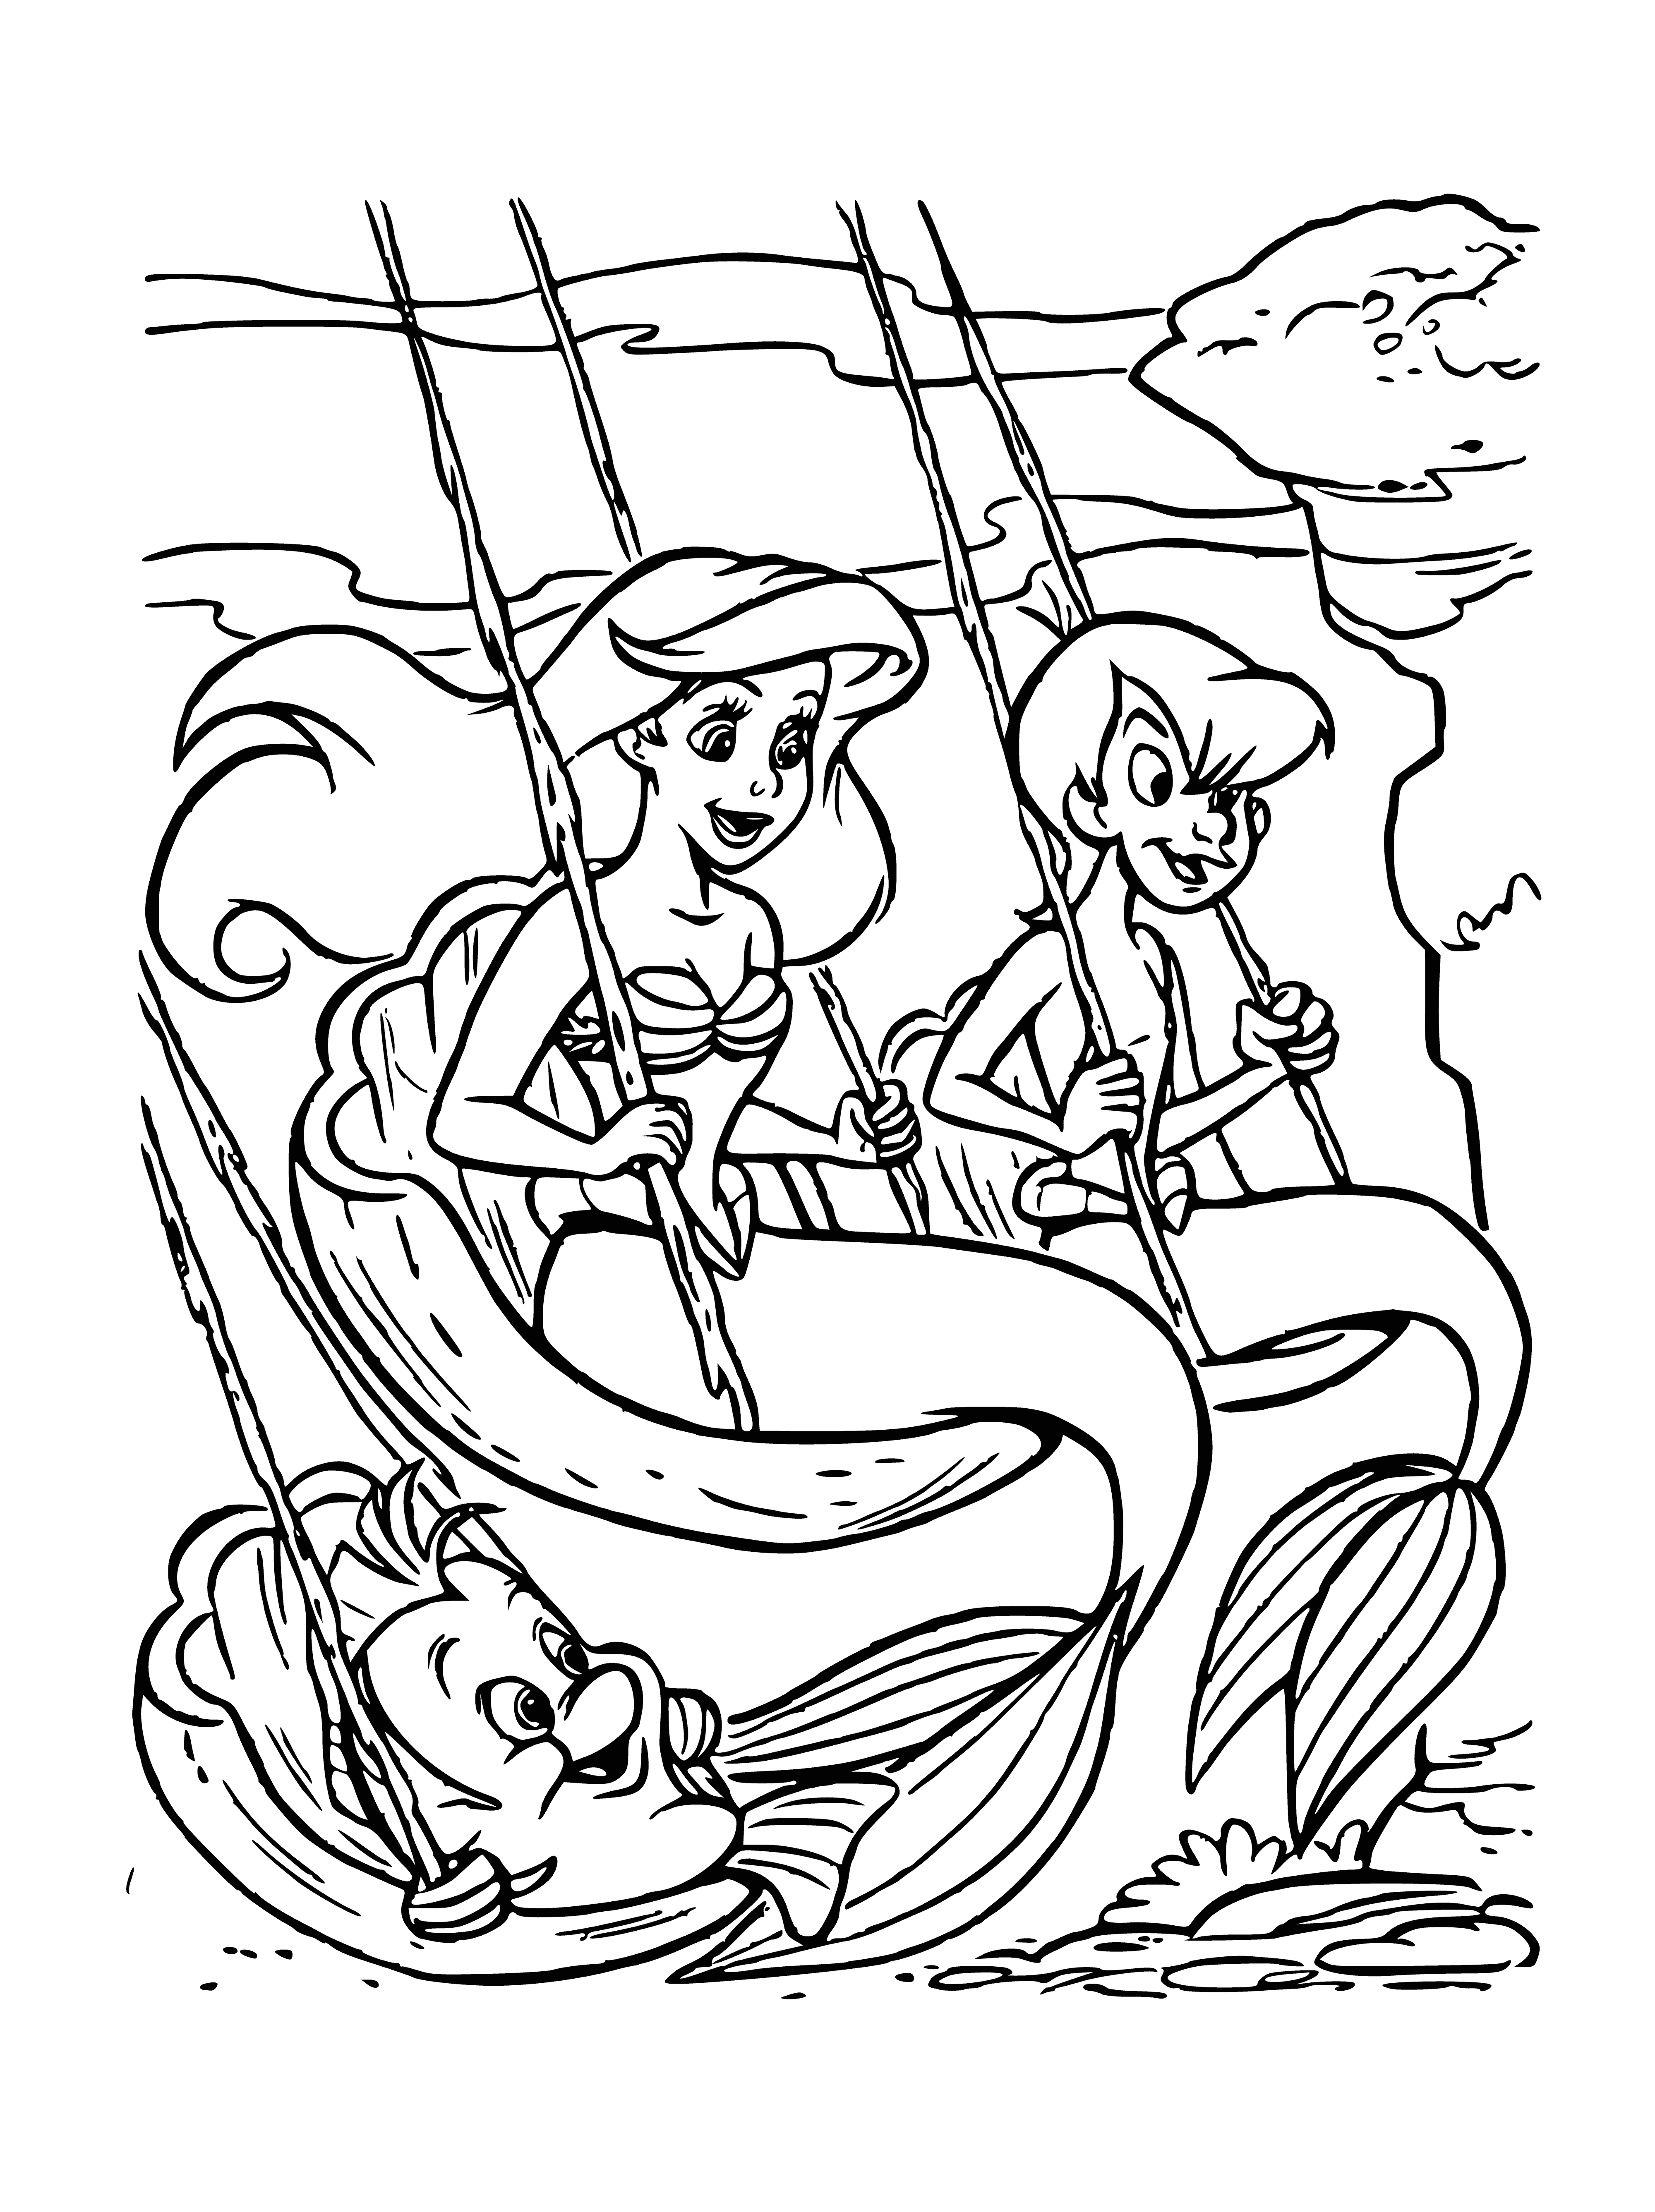 The little mermaid with a friend coloring page